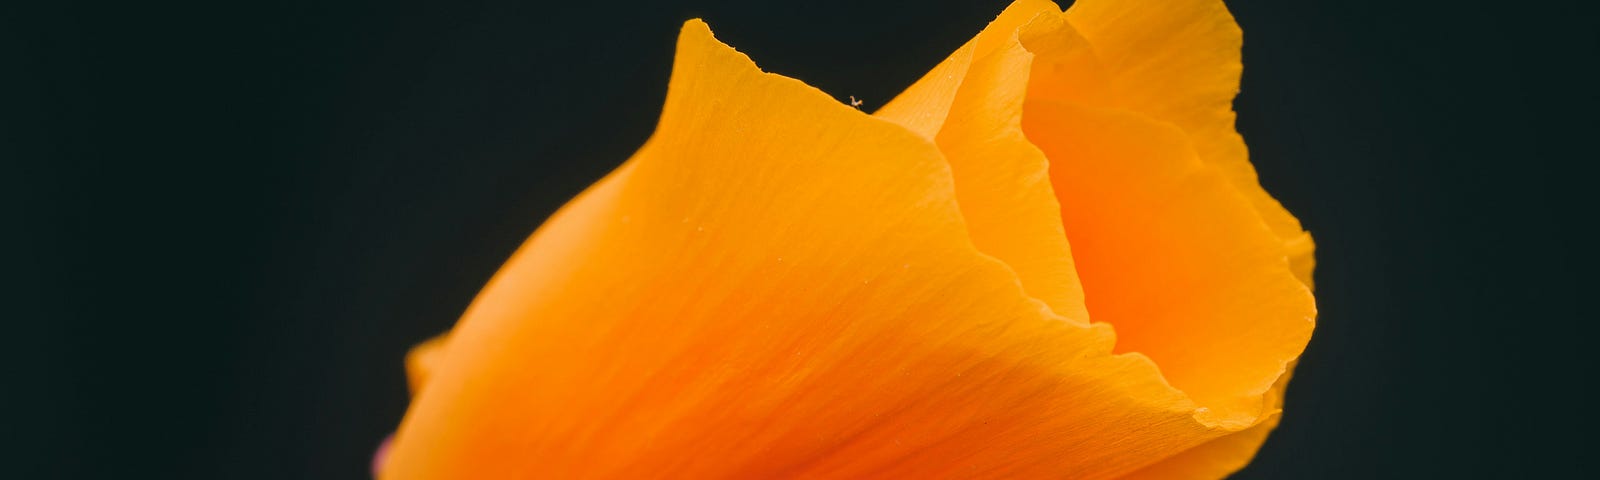 A Lone Yellow Poppy Surrounded by Darkness